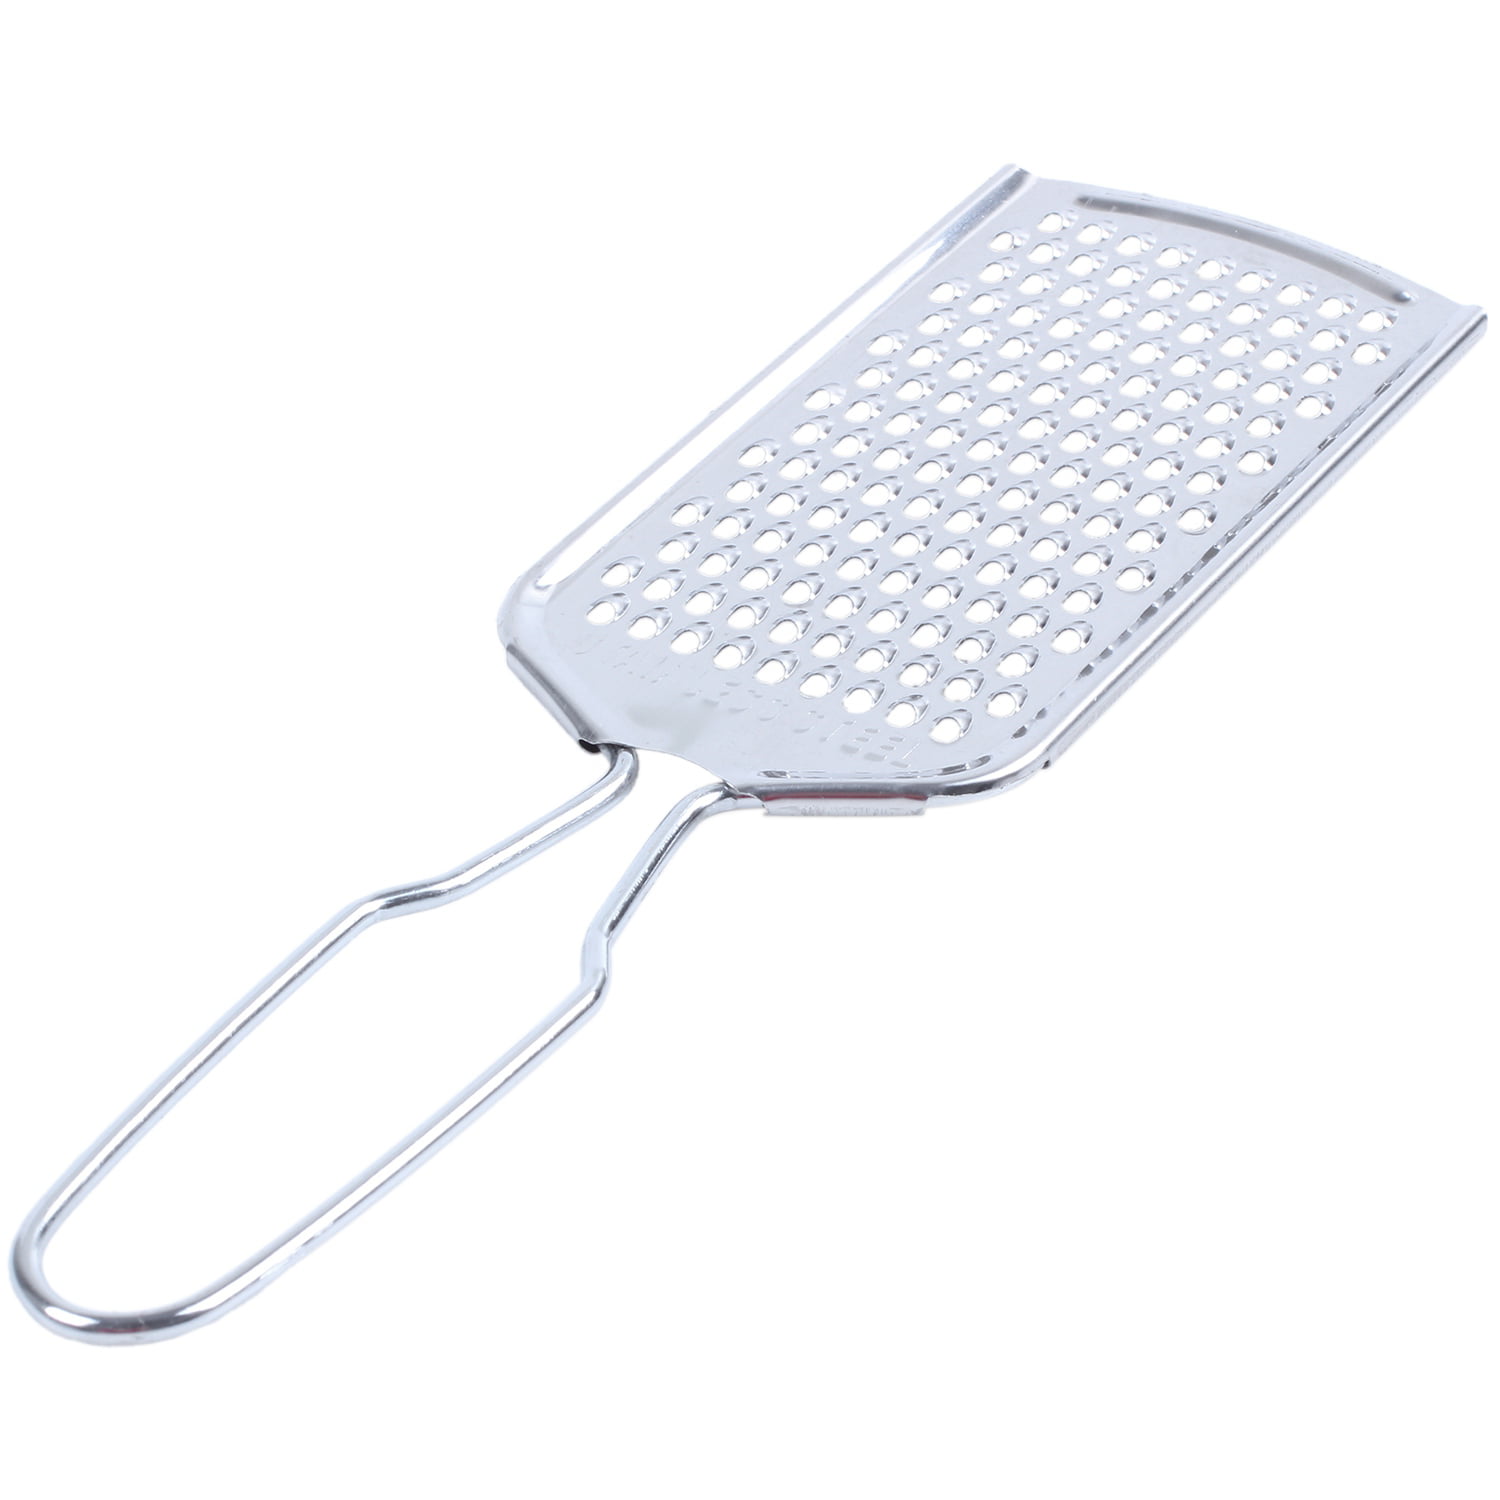 Hand Held Curved Grater Shredder Ginger Potato Cheese Kitchen Tool SA 